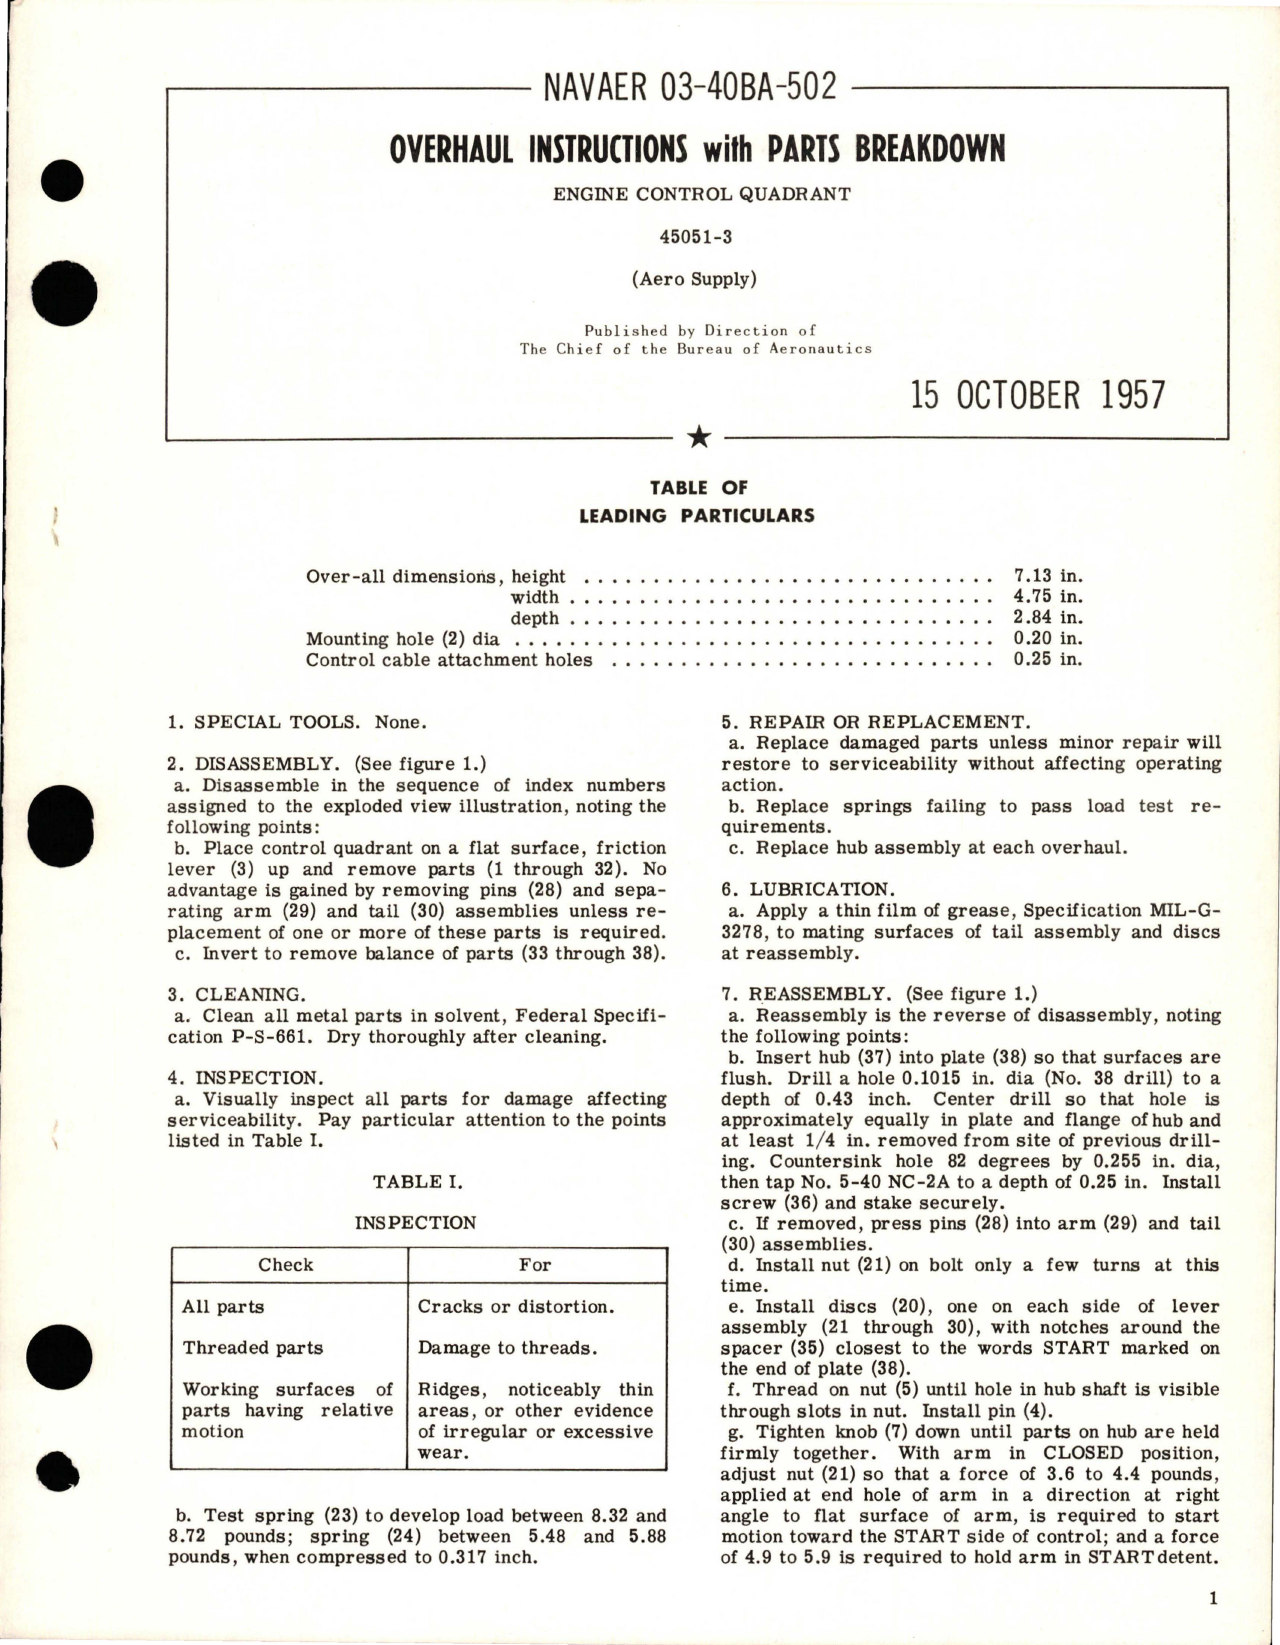 Sample page 1 from AirCorps Library document: Overhaul Instructions with Parts Breakdown for Engine Control Quadrant - 45051-3